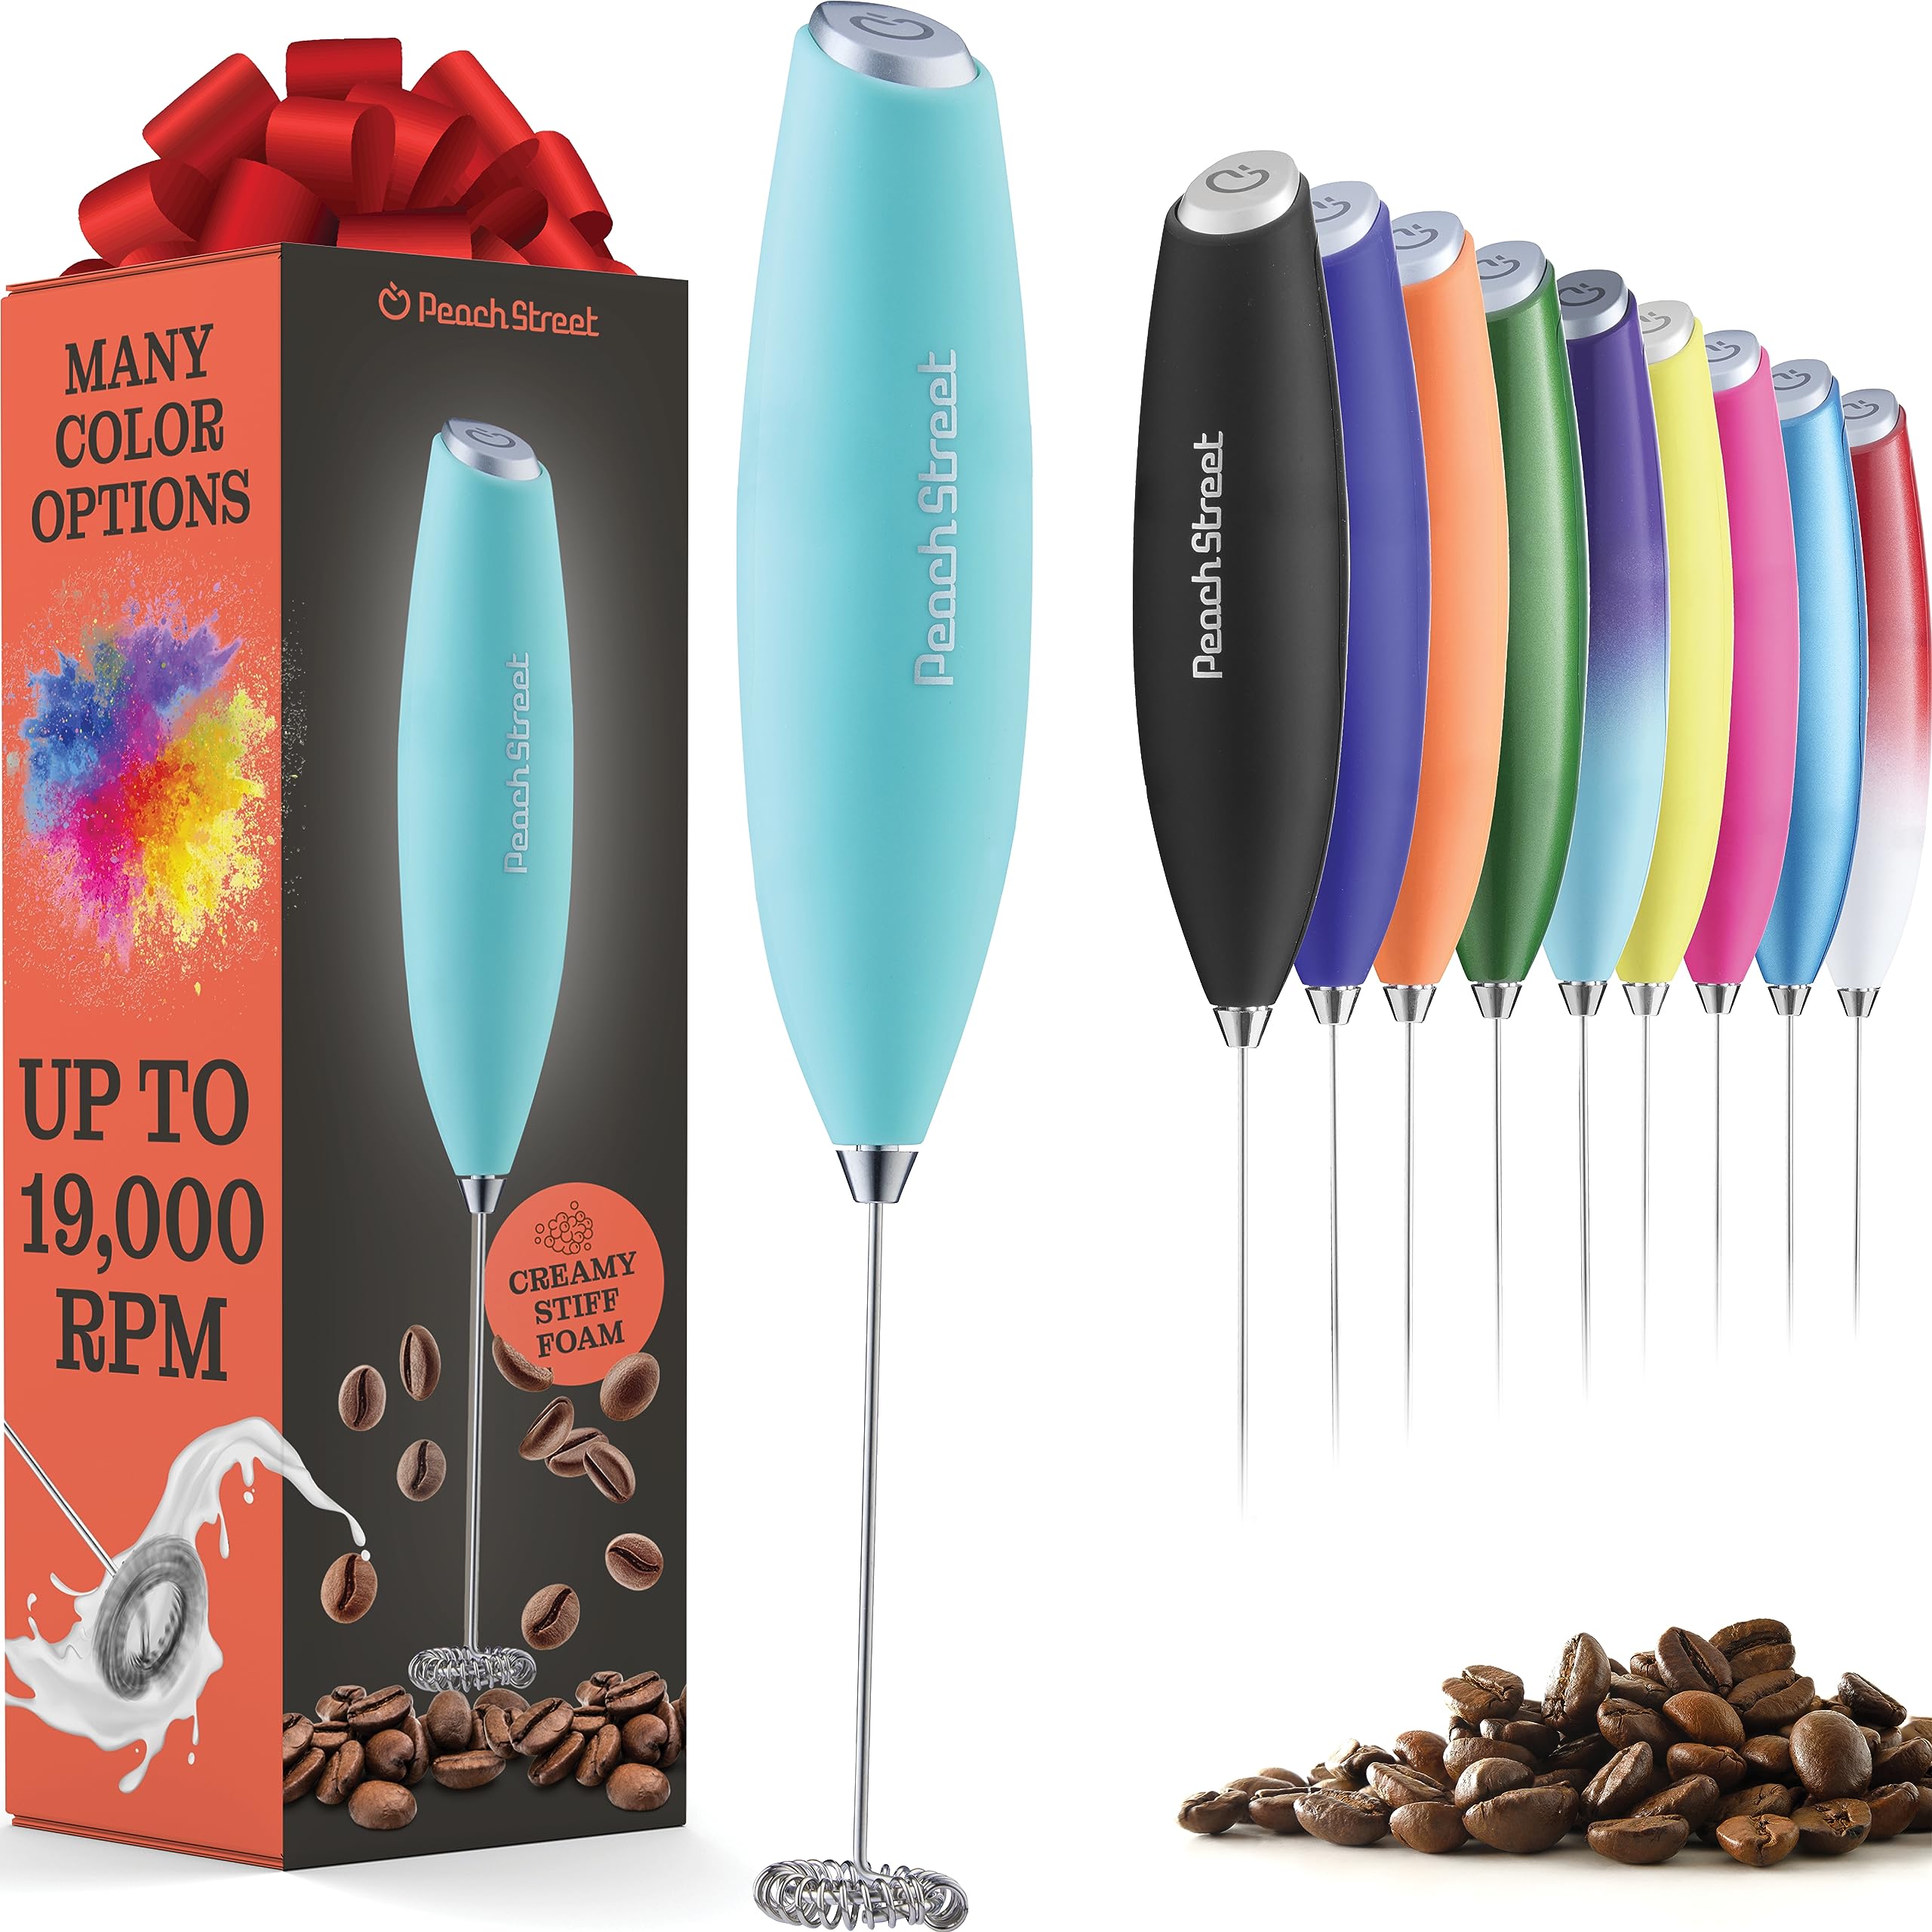 Powerful Handheld Milk Frother, Mini Milk Foamer, Battery Operated (Not included) Stainless Steel Drink Mixer for Coffee, Lattes, Cappuccino, Frappe, Matcha, Hot Chocolate.  - Like New